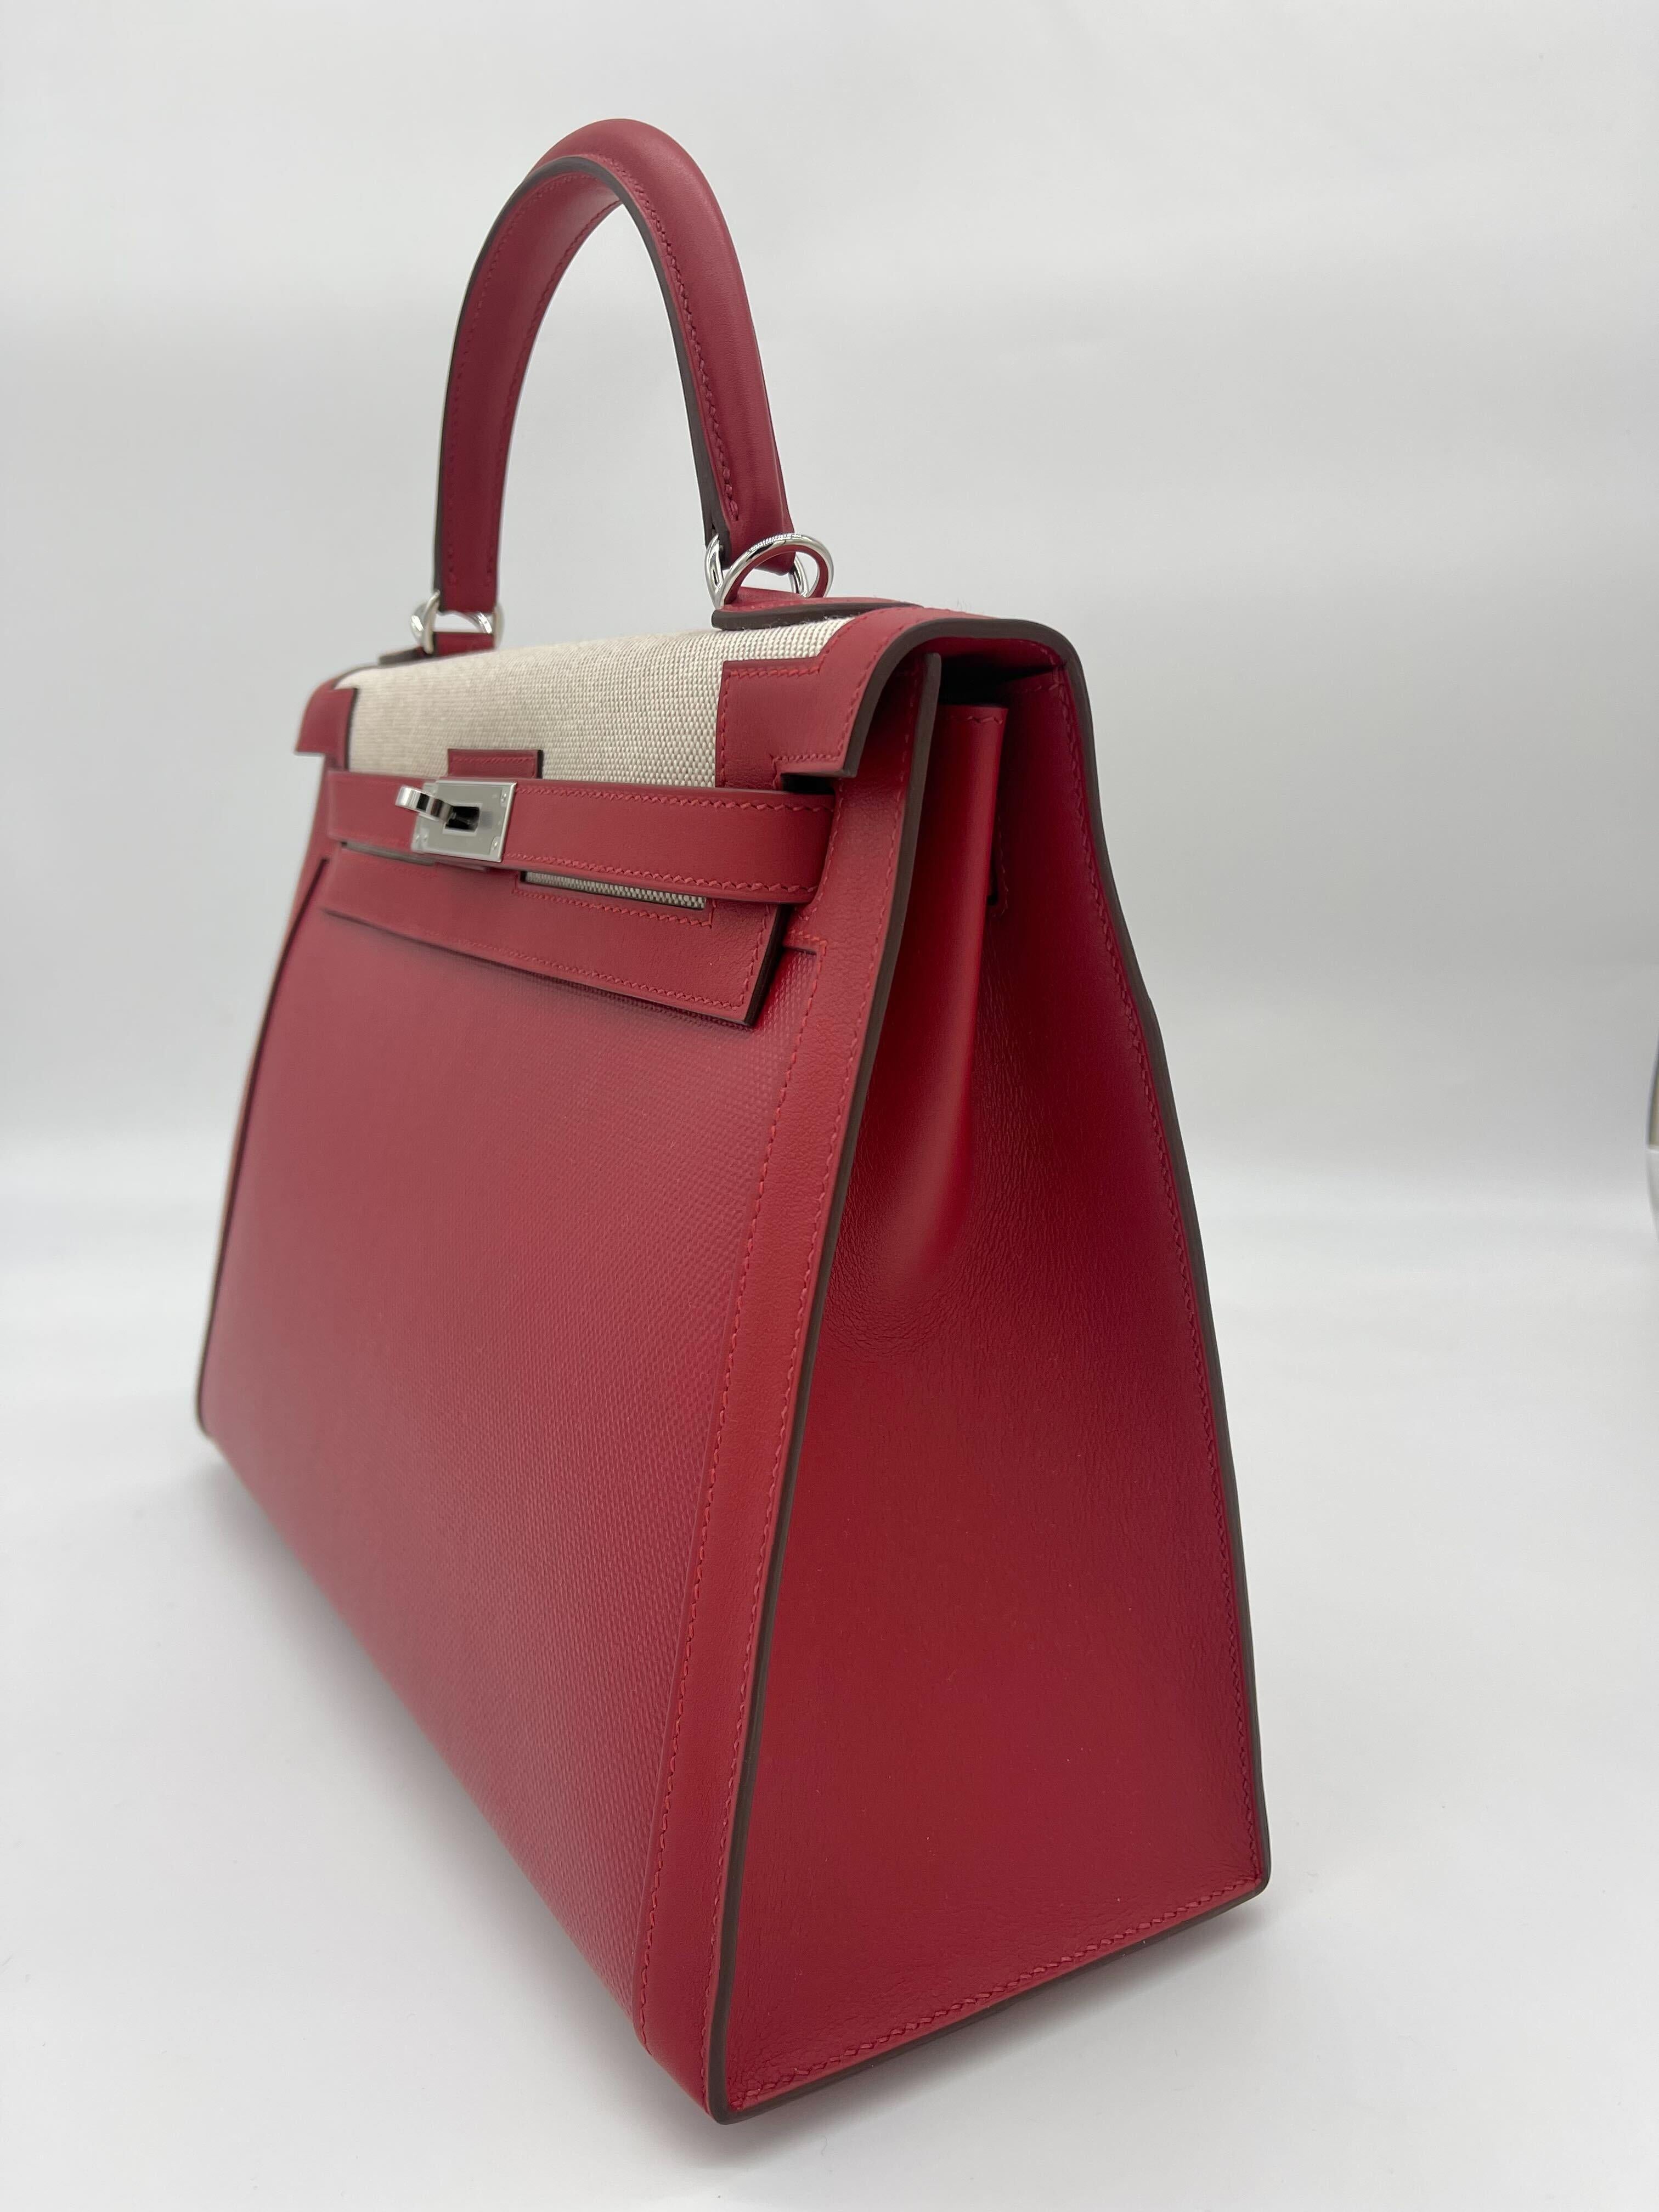 Hermes Kelly 32 Sellier Rouge Piment Swift and Toile Berline Palladium Hardware For Sale 1